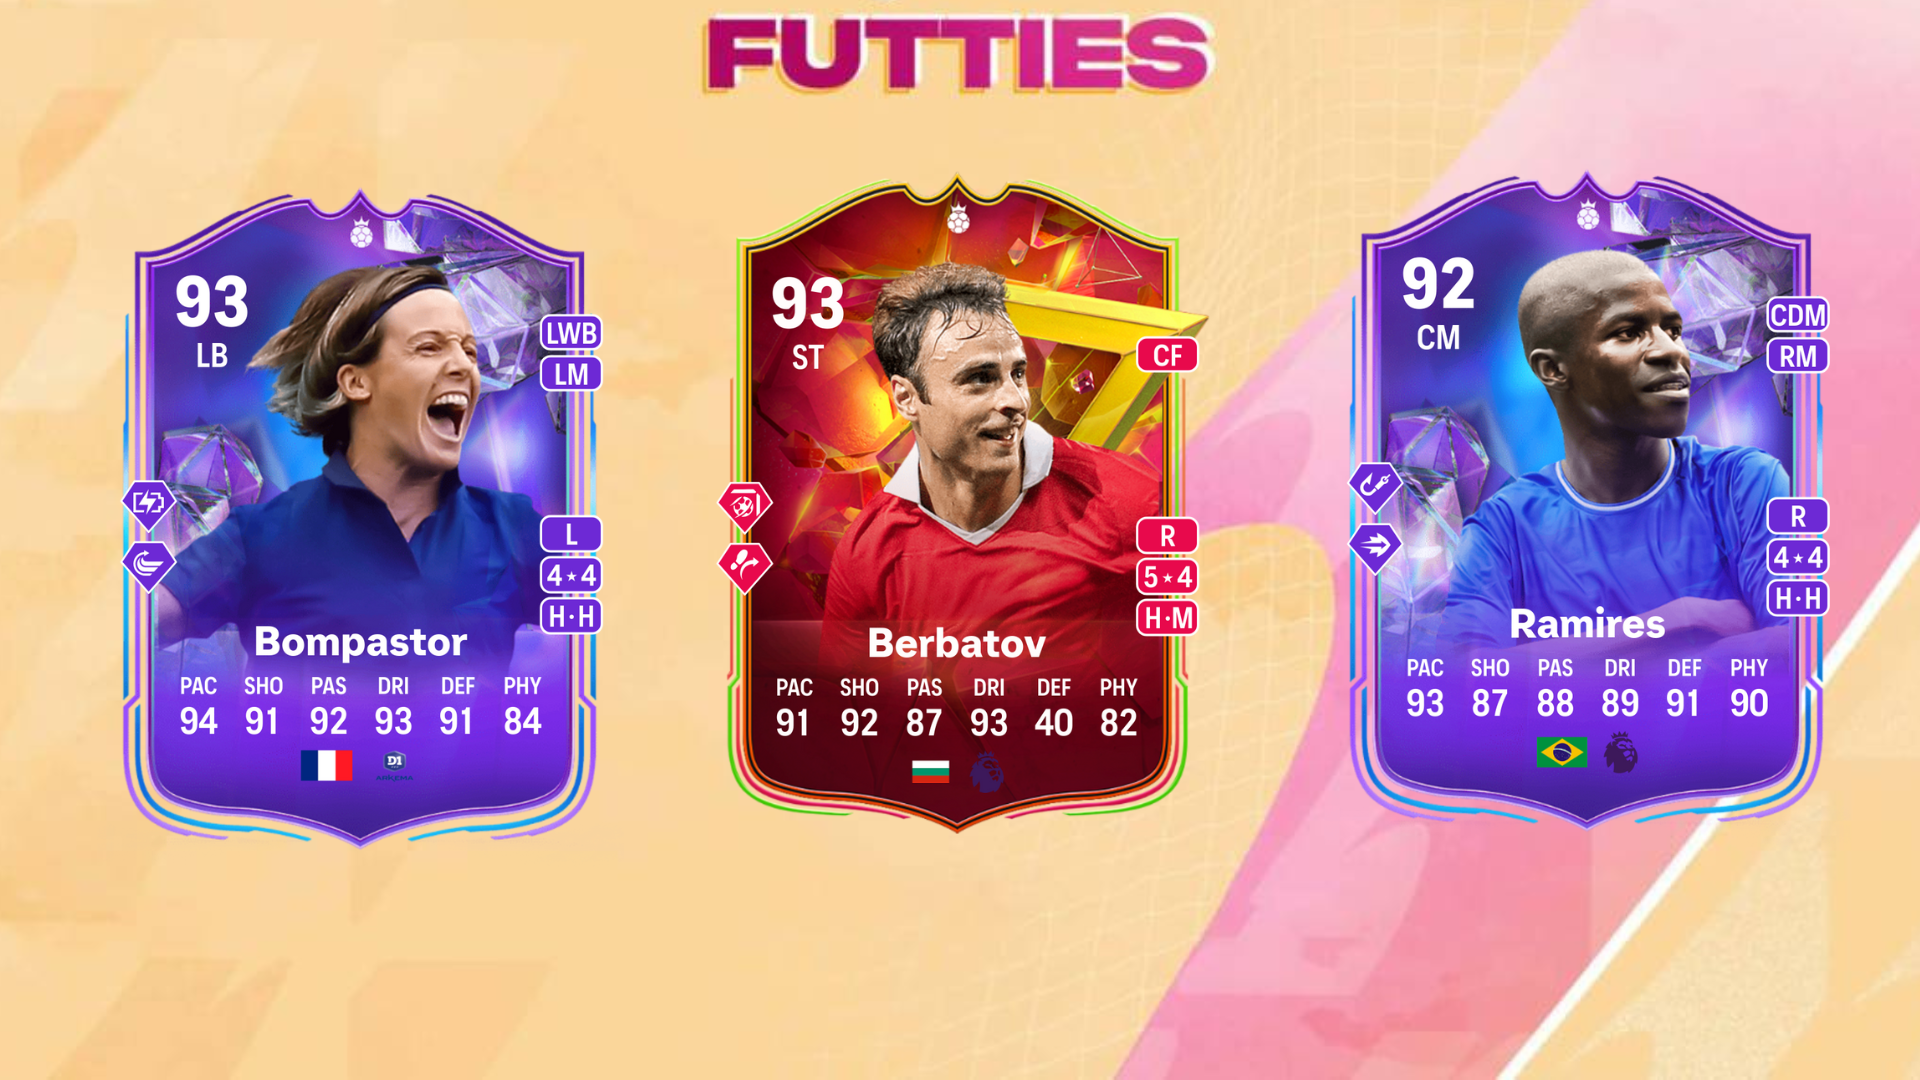 An image of FUTTIES Super Hero Evolution in EA FC 24